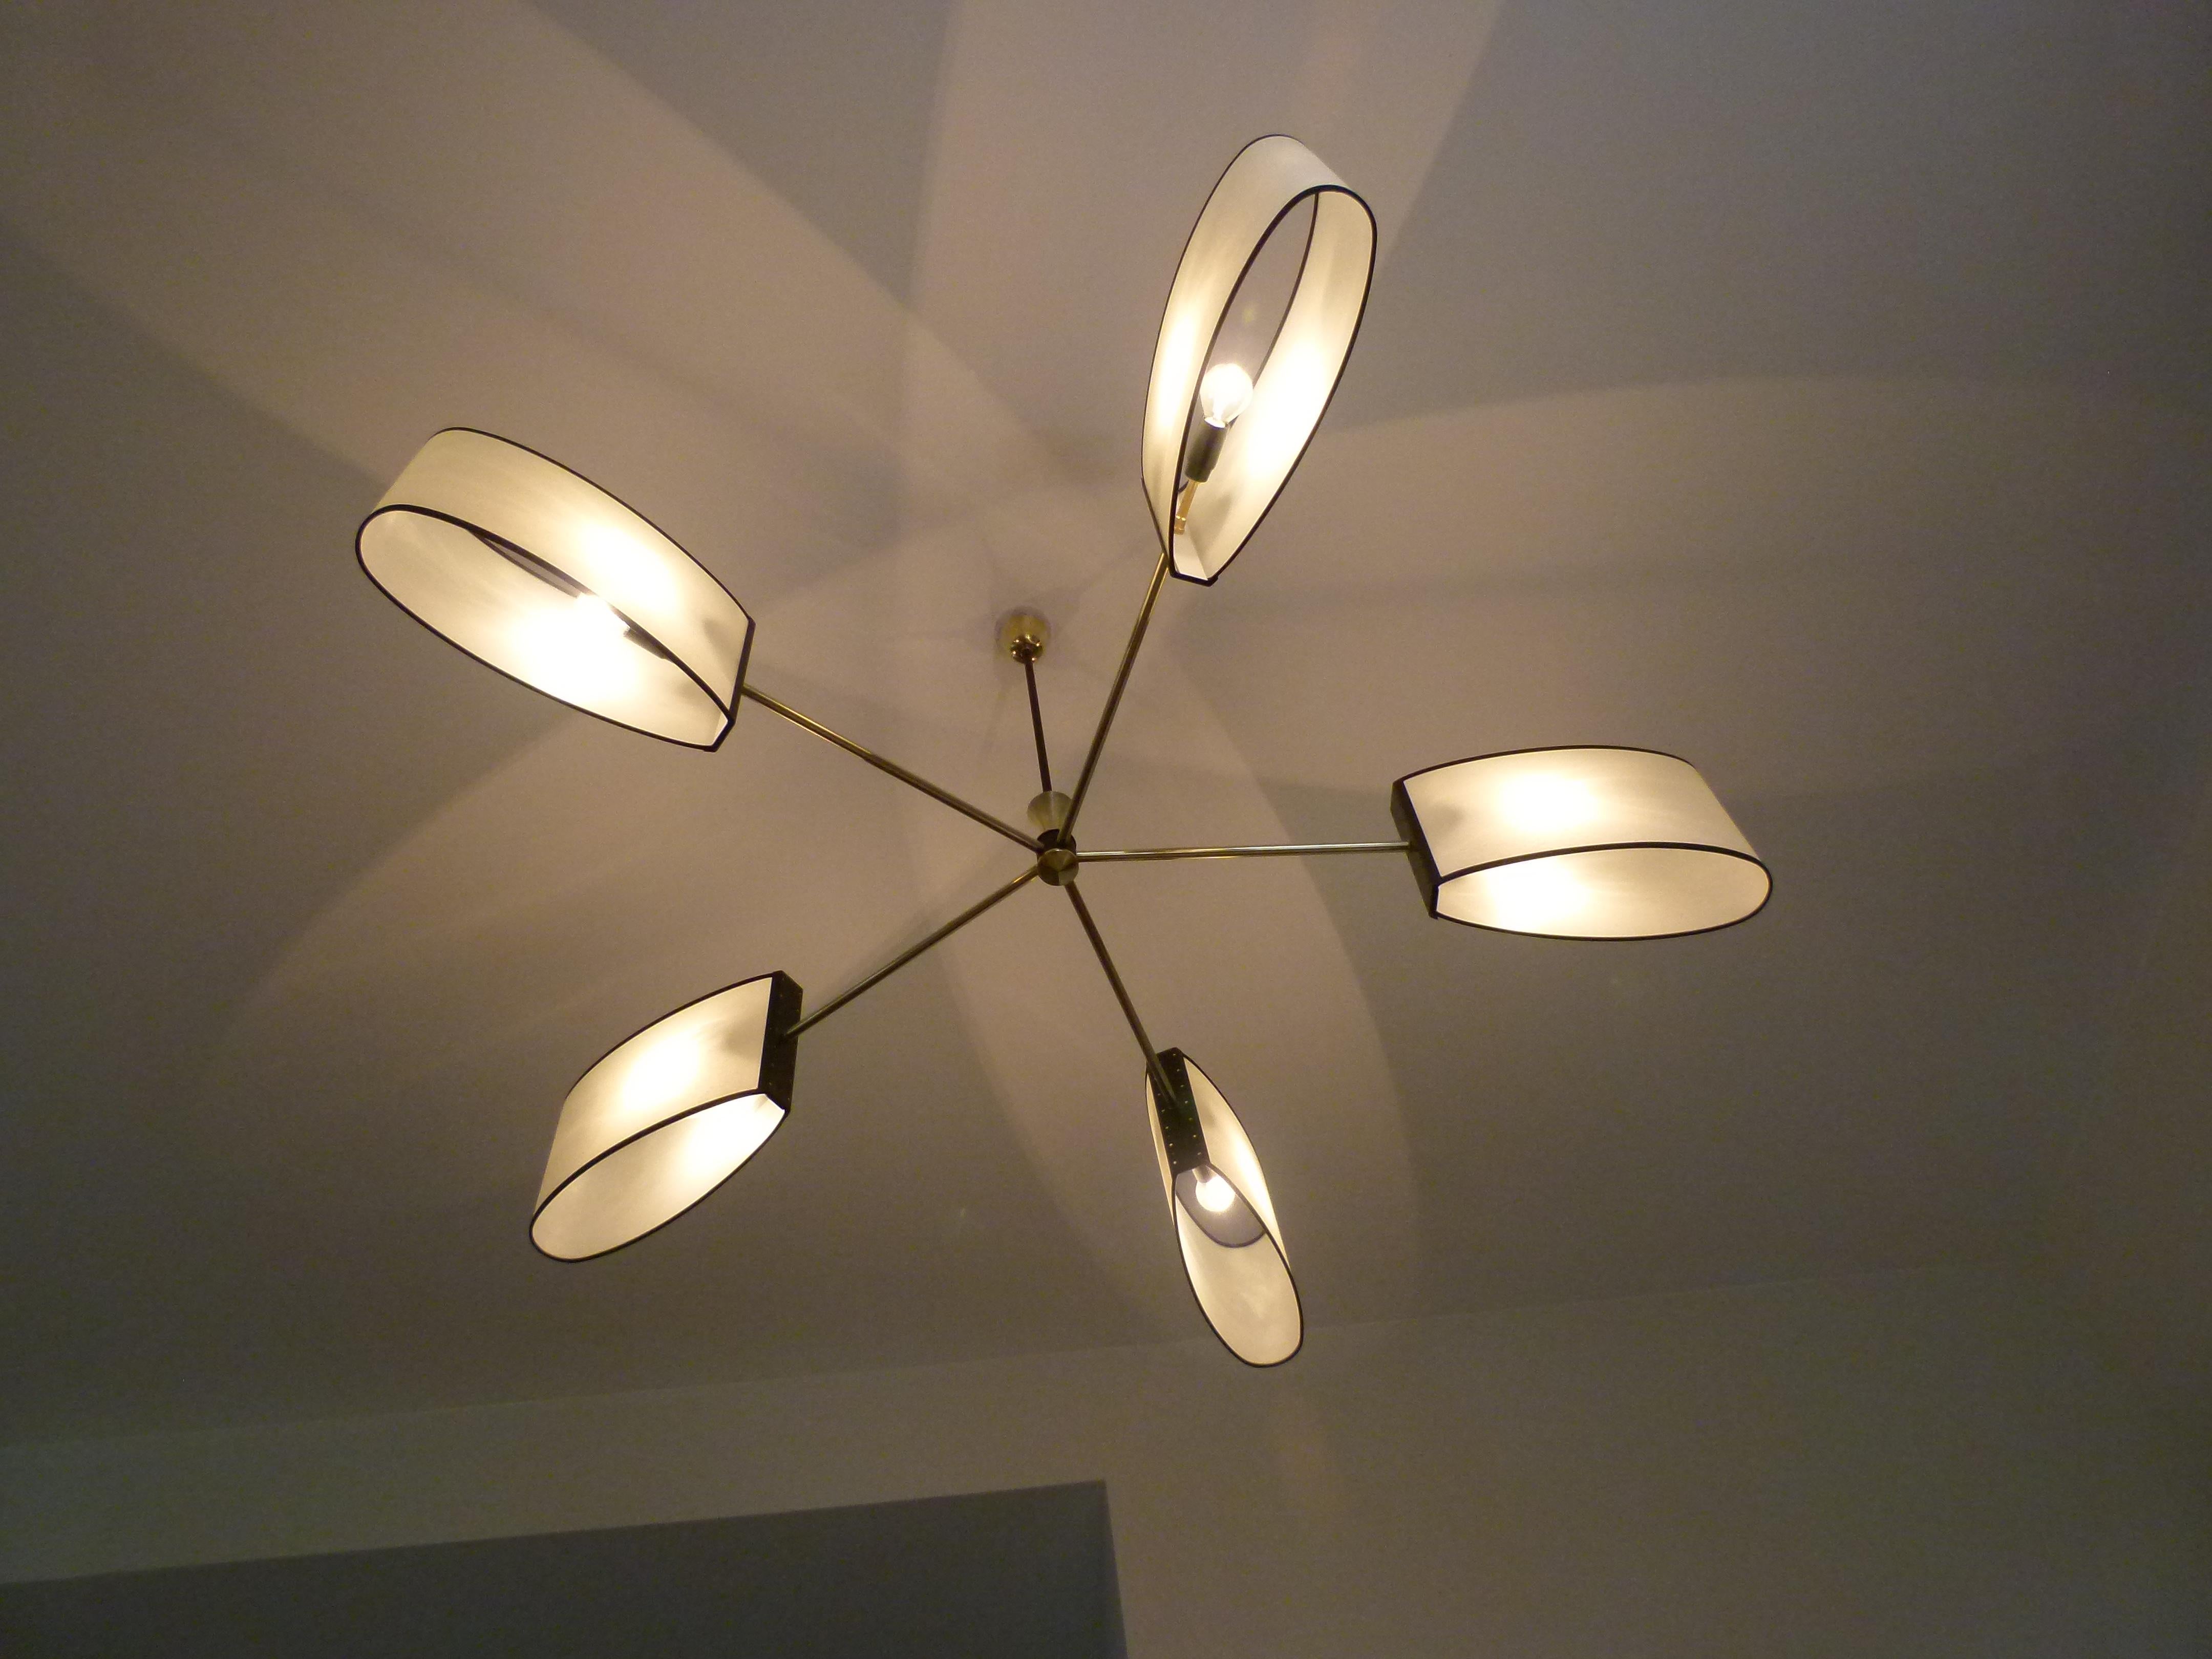 Mid-Century Modern 1950s Brass Chandelier with Five Lighted Arms by Maison Lunel